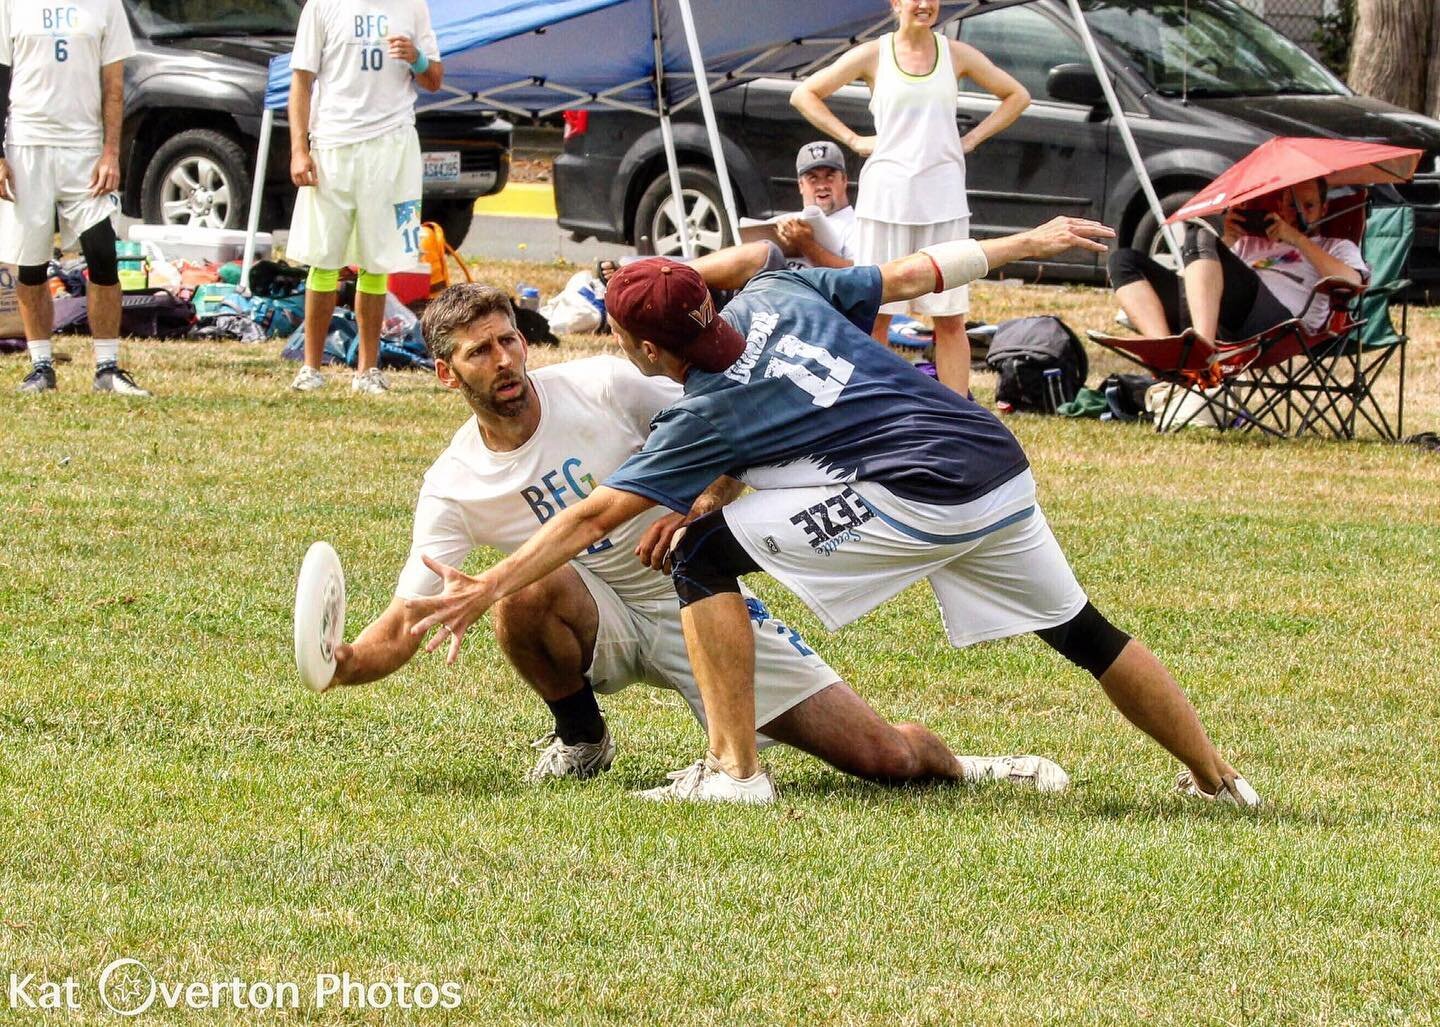 Let&rsquo;s get ROOTIN! 🙌🏼🏆🙌🏼
Dave, our Shop Foreman, is currently in Ireland competing in the Masters World Ultimate Frisbee Championships! As his team is well on their way to the quarter finals, we&rsquo;d like you help us cheer him on and bri